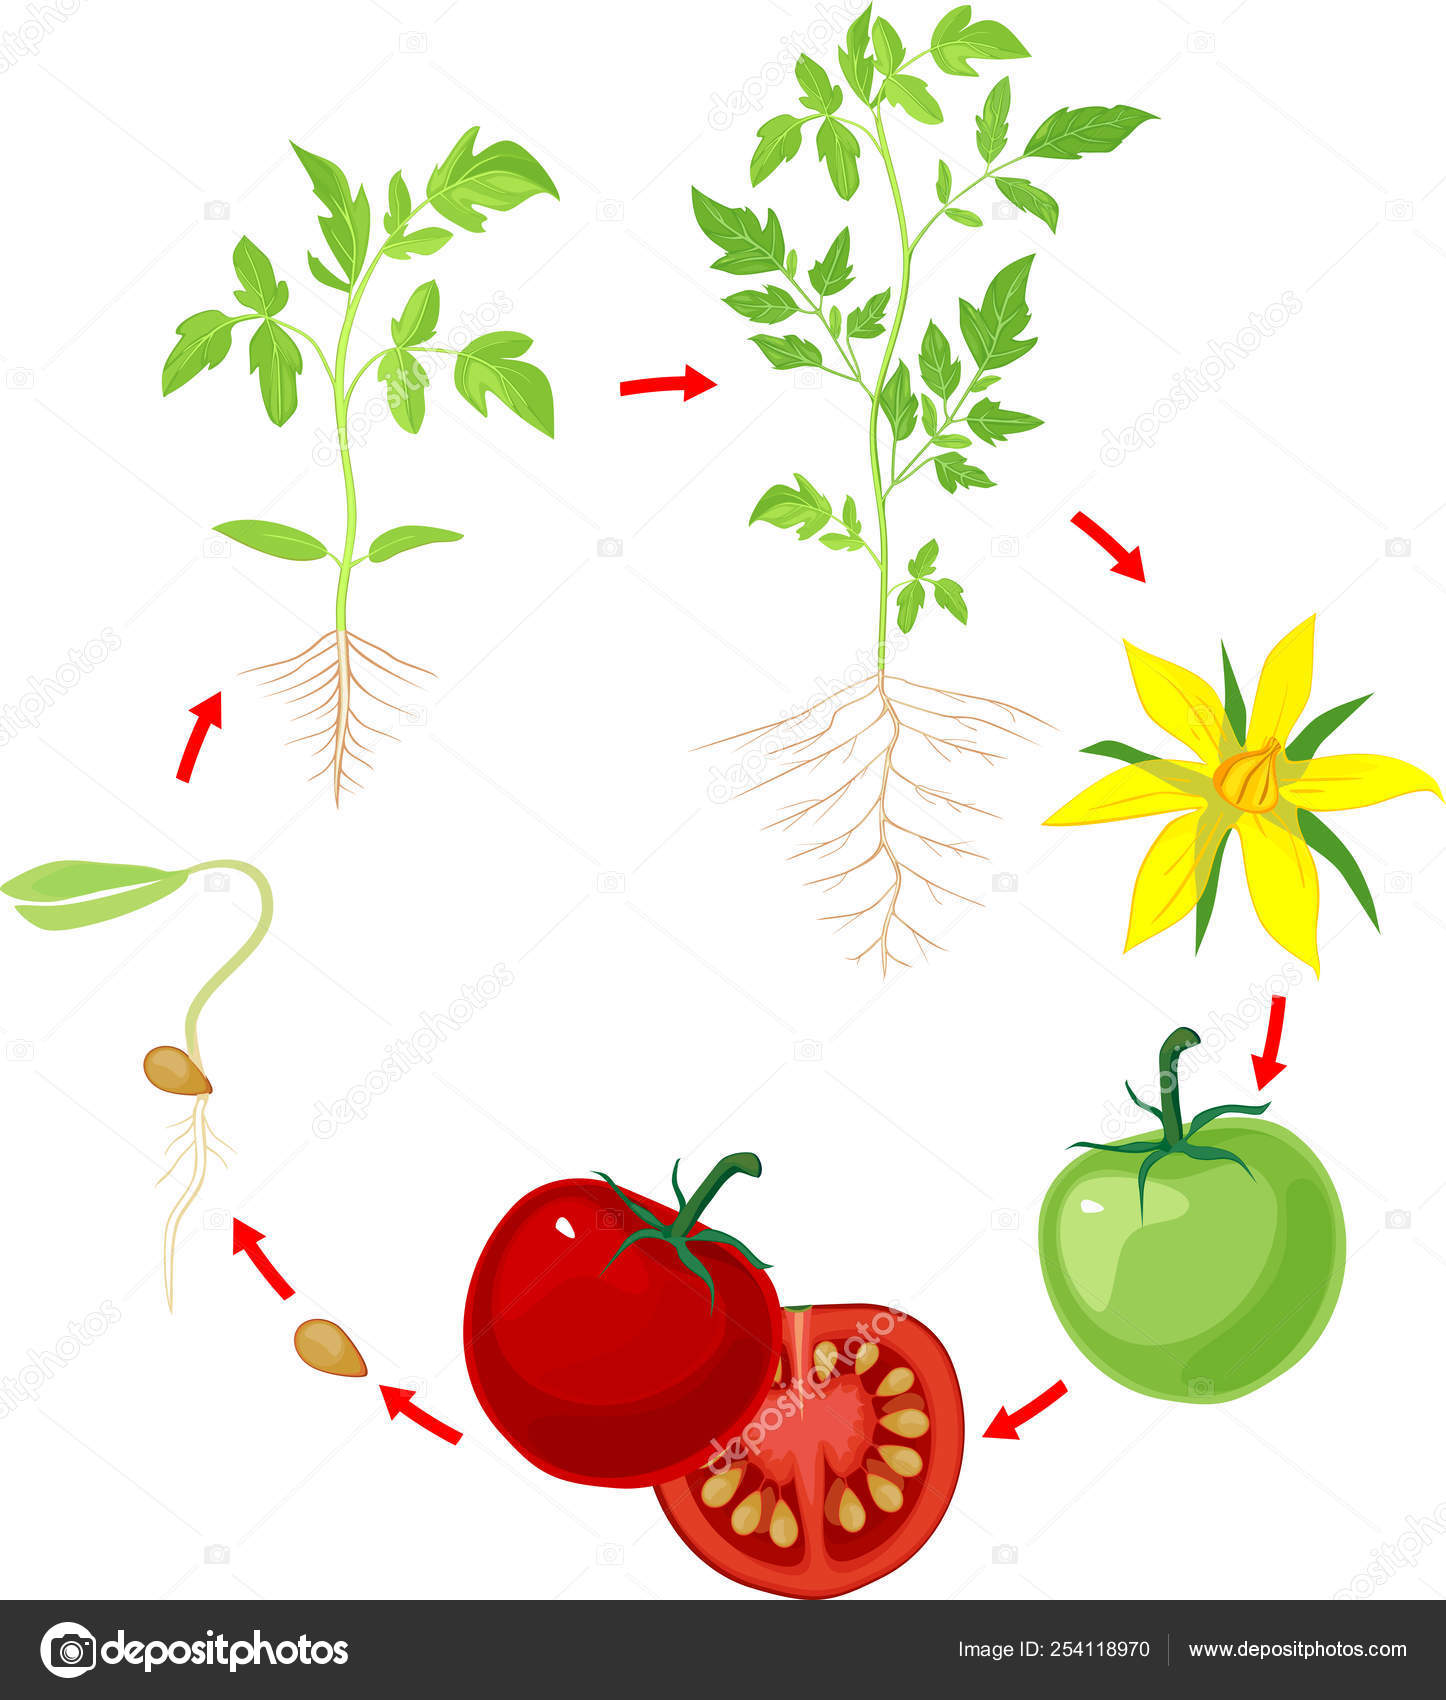 Life Cycle Tomato Plant Stages Growth Seed Sprout Adult ...